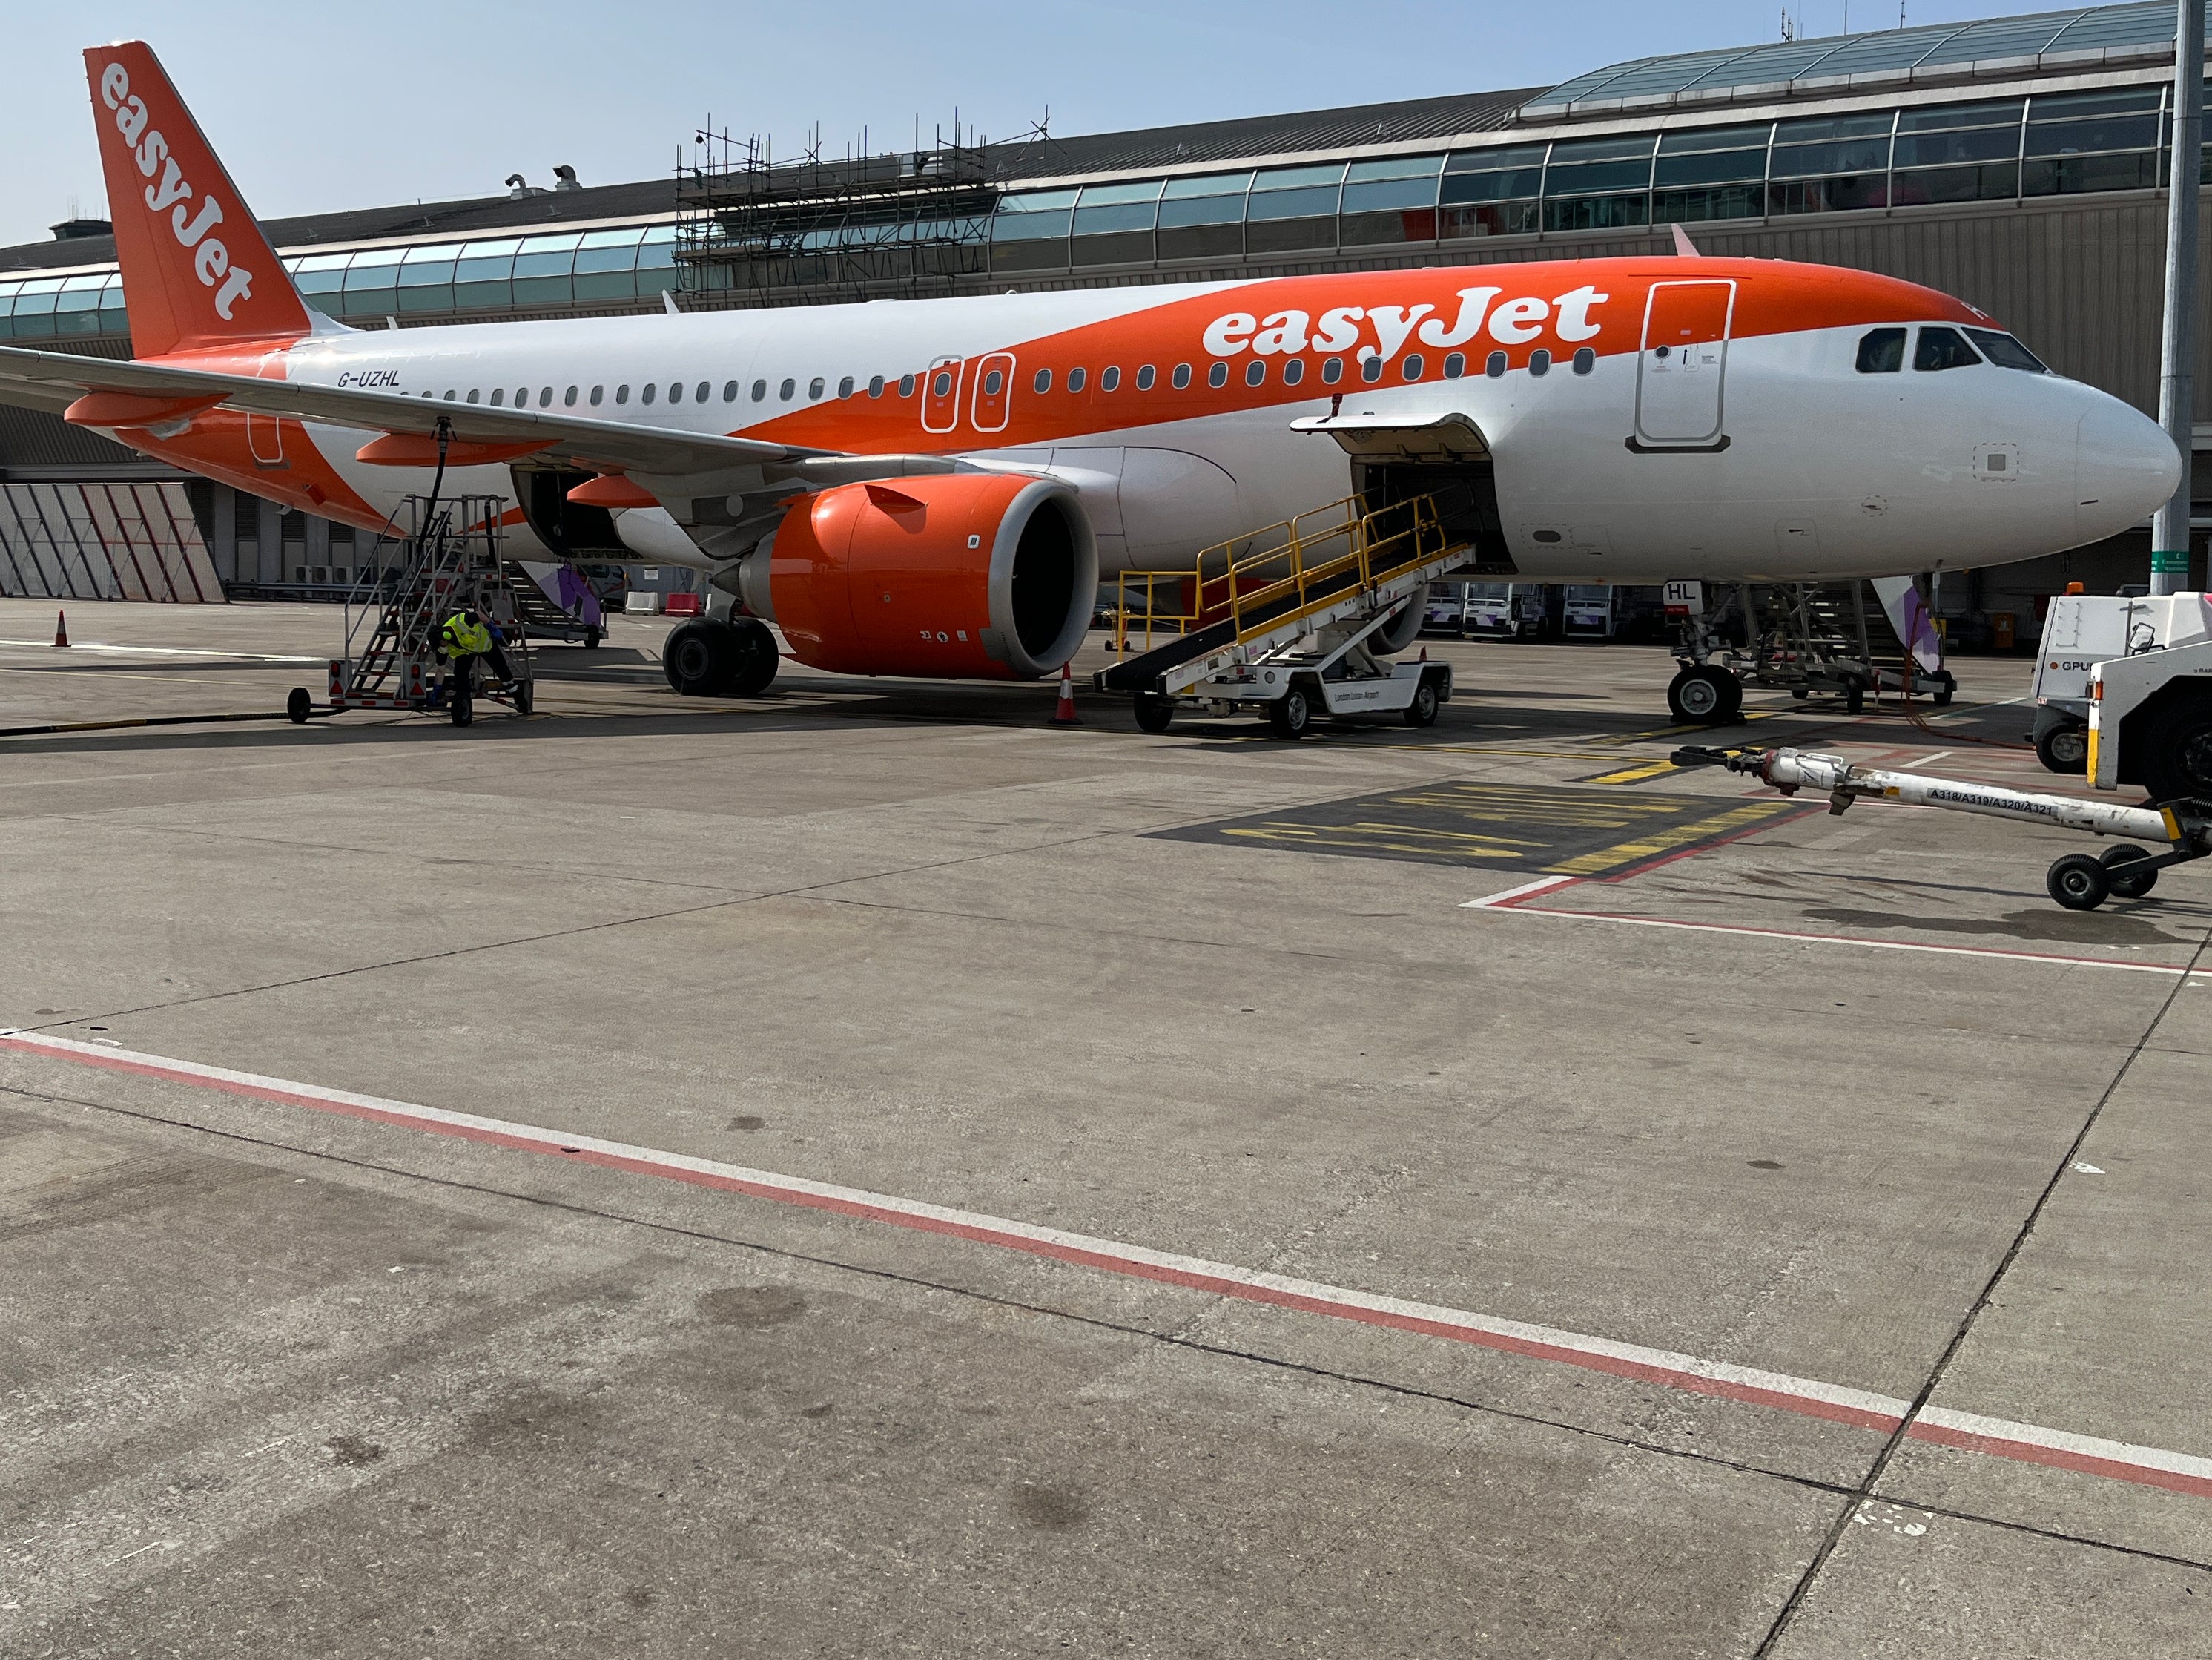 Ready to go? easyJet Airbus A320 at Luton airport, where the airline is based